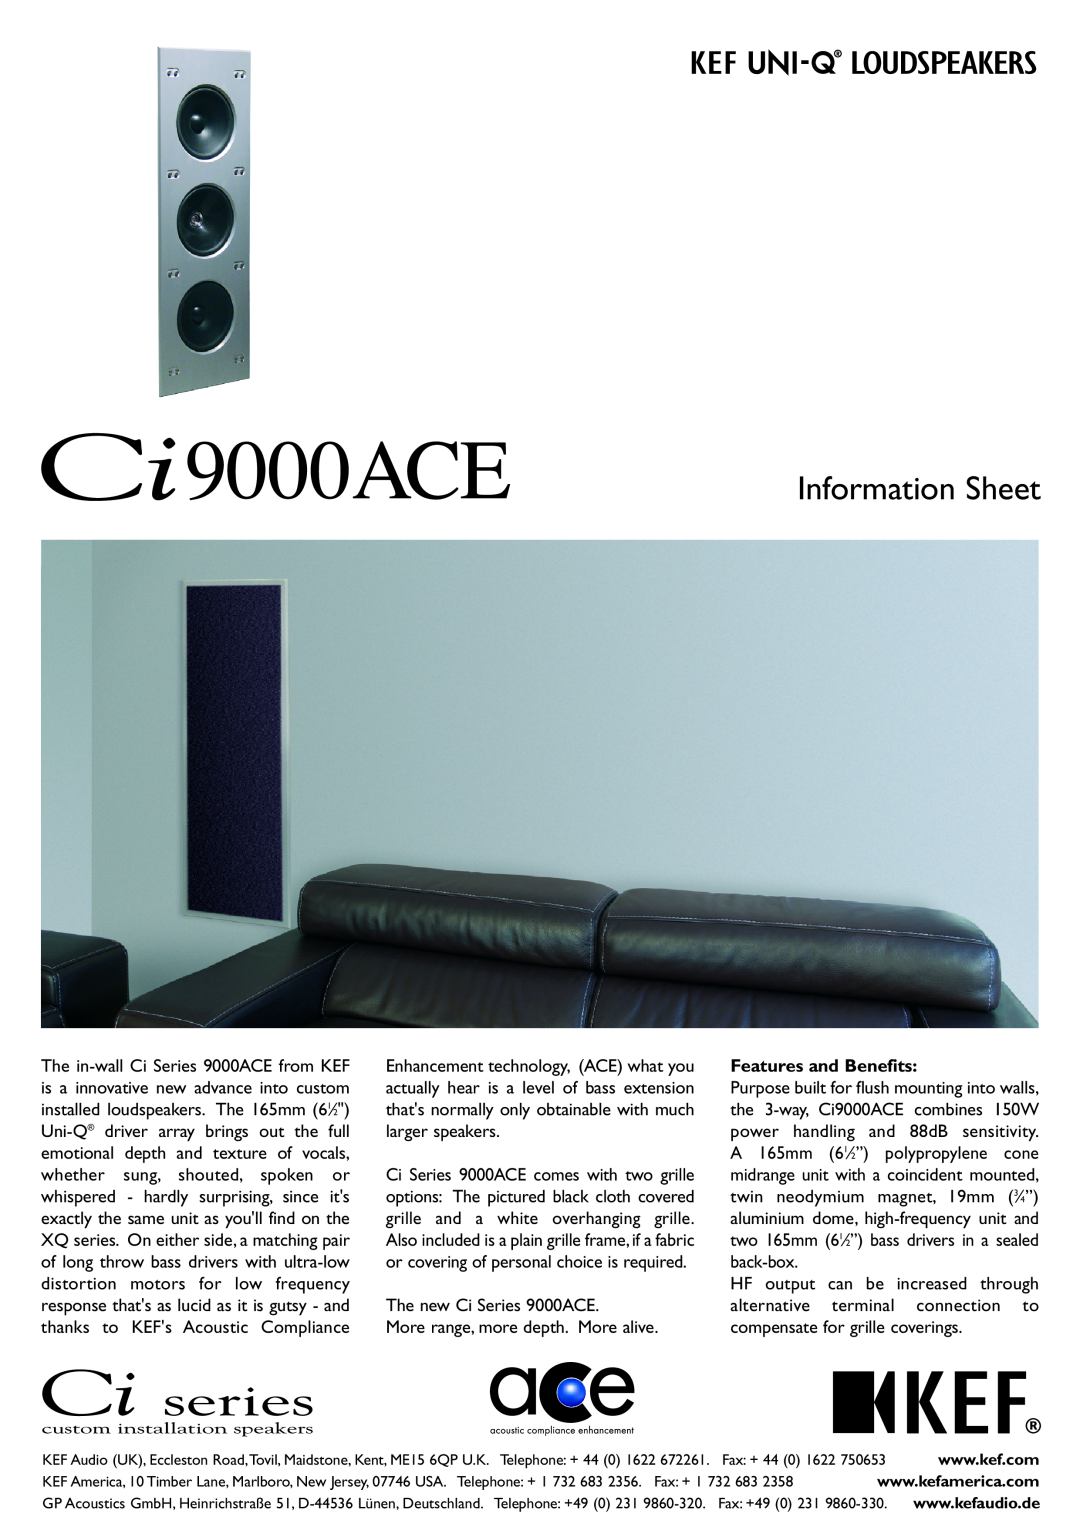 KEF Audio CI9000ACE manual The new Ci Series 9000ACE, More range, more depth. More alive, Features and Benefits 